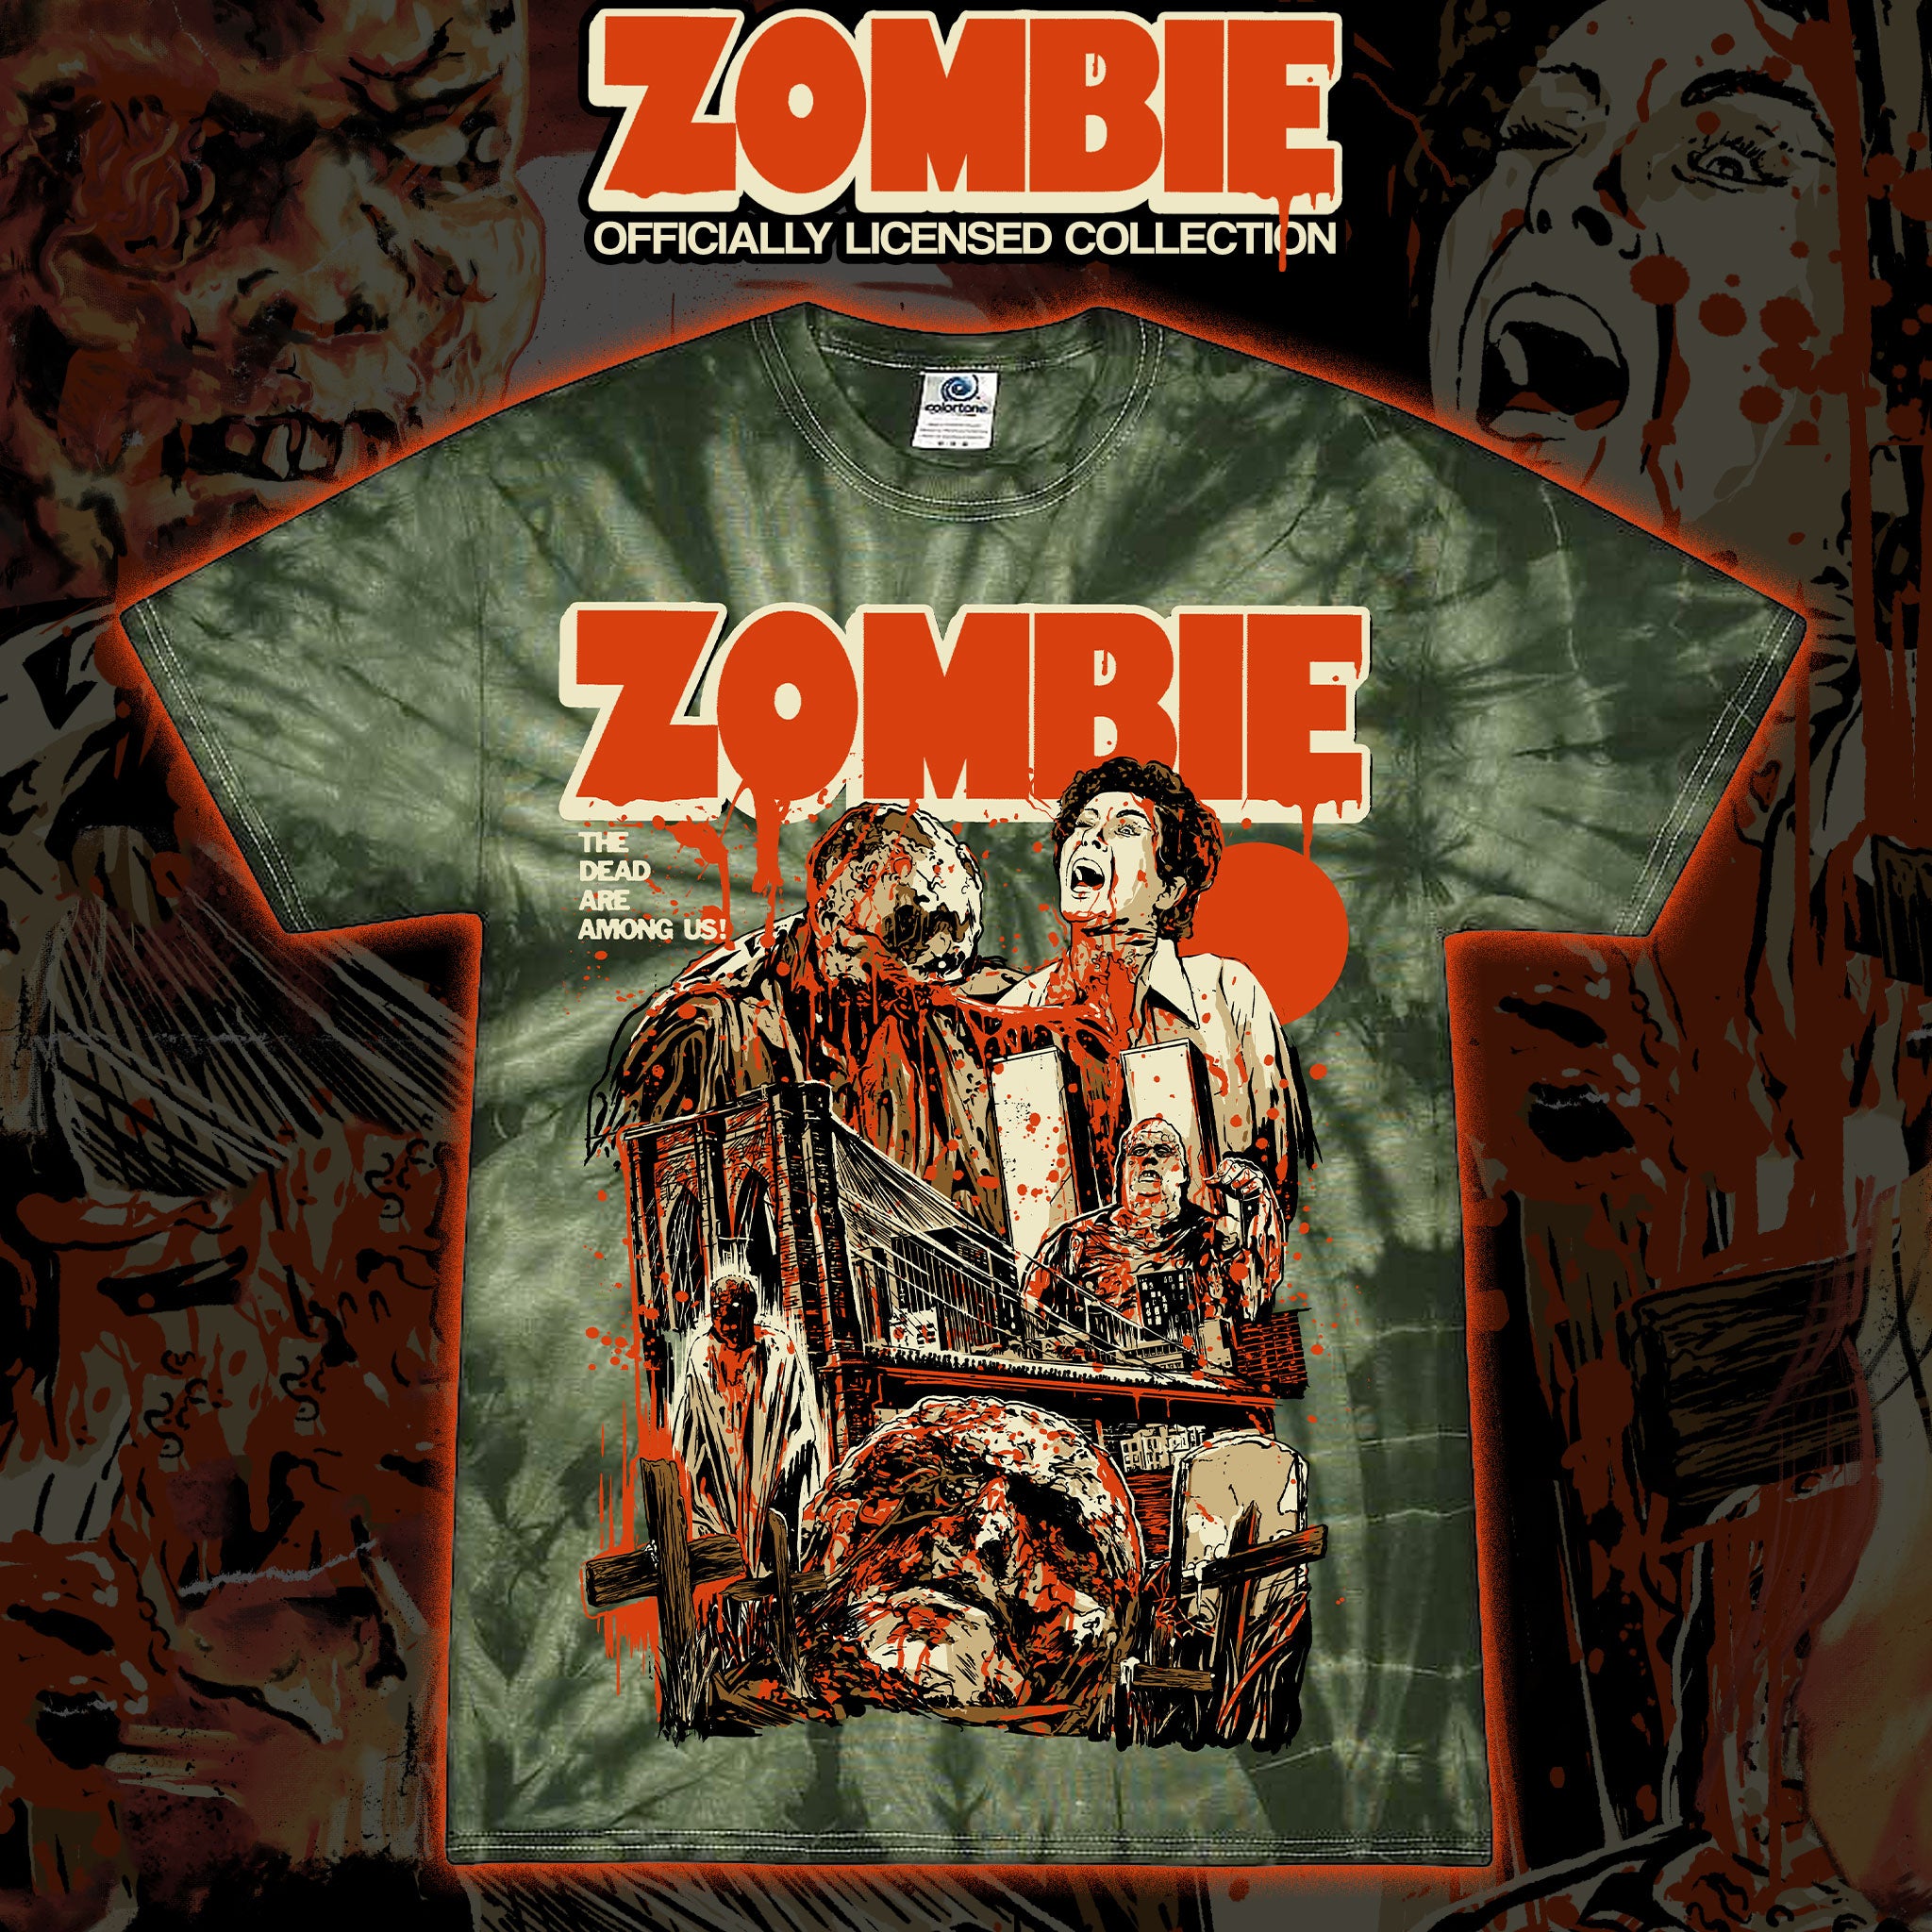 ZOMBIE "The Dead Are Among Us!" Tie Dye